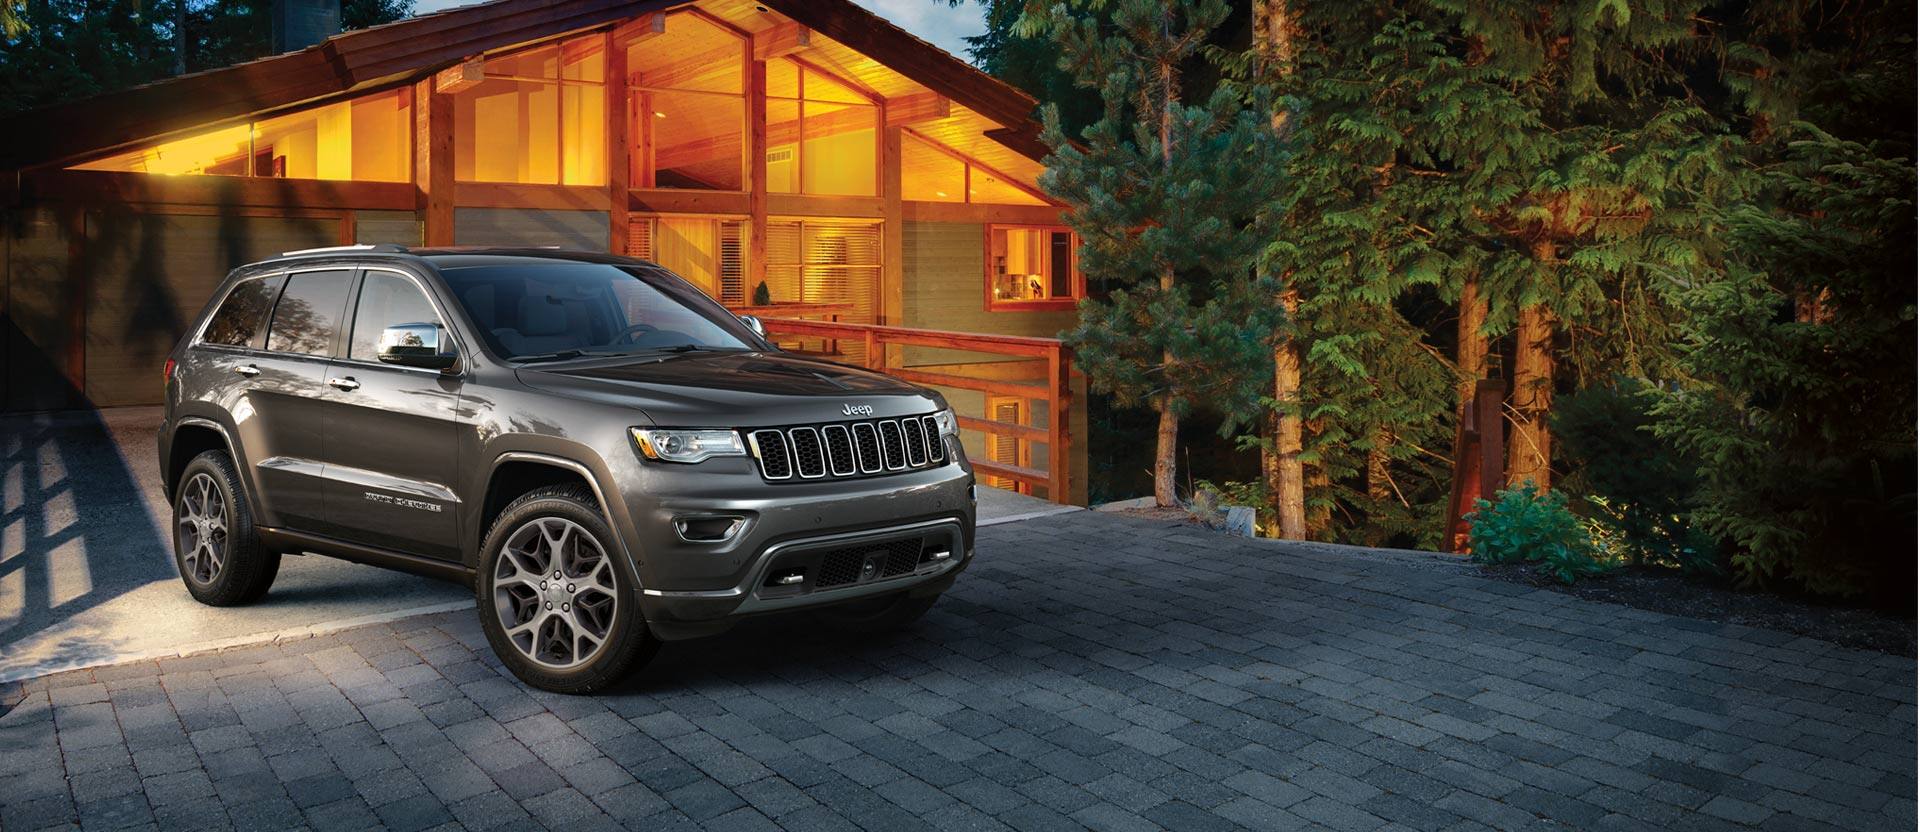 Jeep Grand Cherokee parked in a driveway.